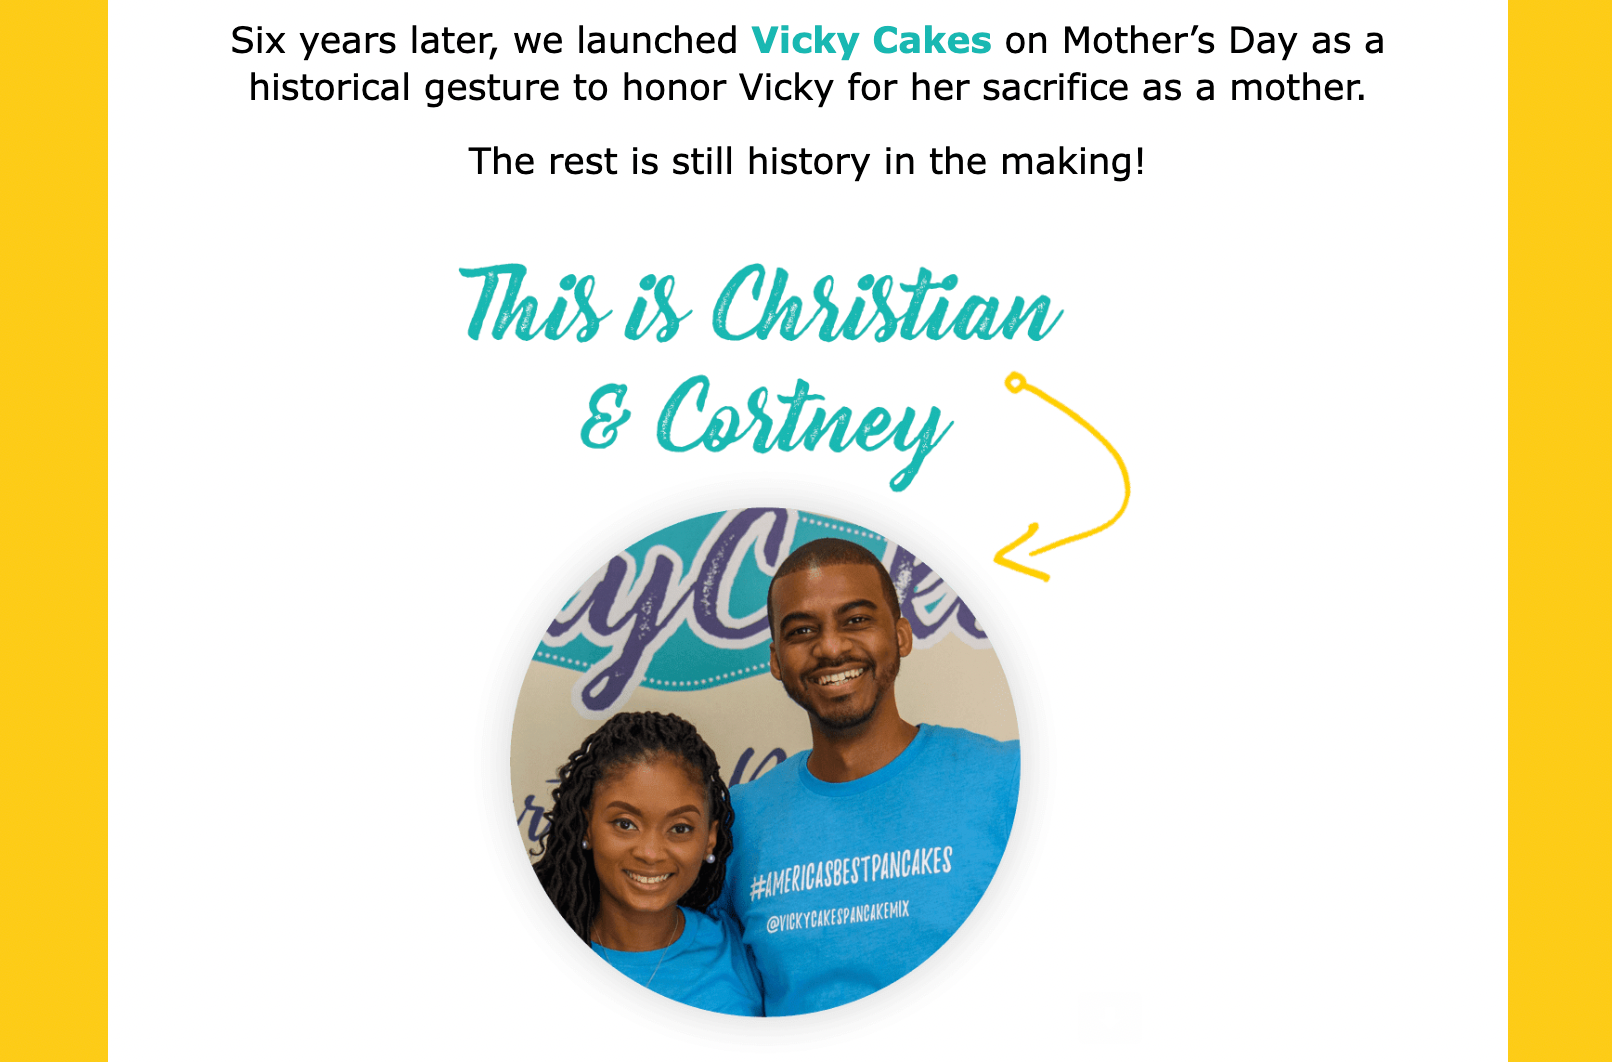 Building a brand’s community through email marketing – A screenshot from Vicky Cakes with text and content introducing the co-founders.